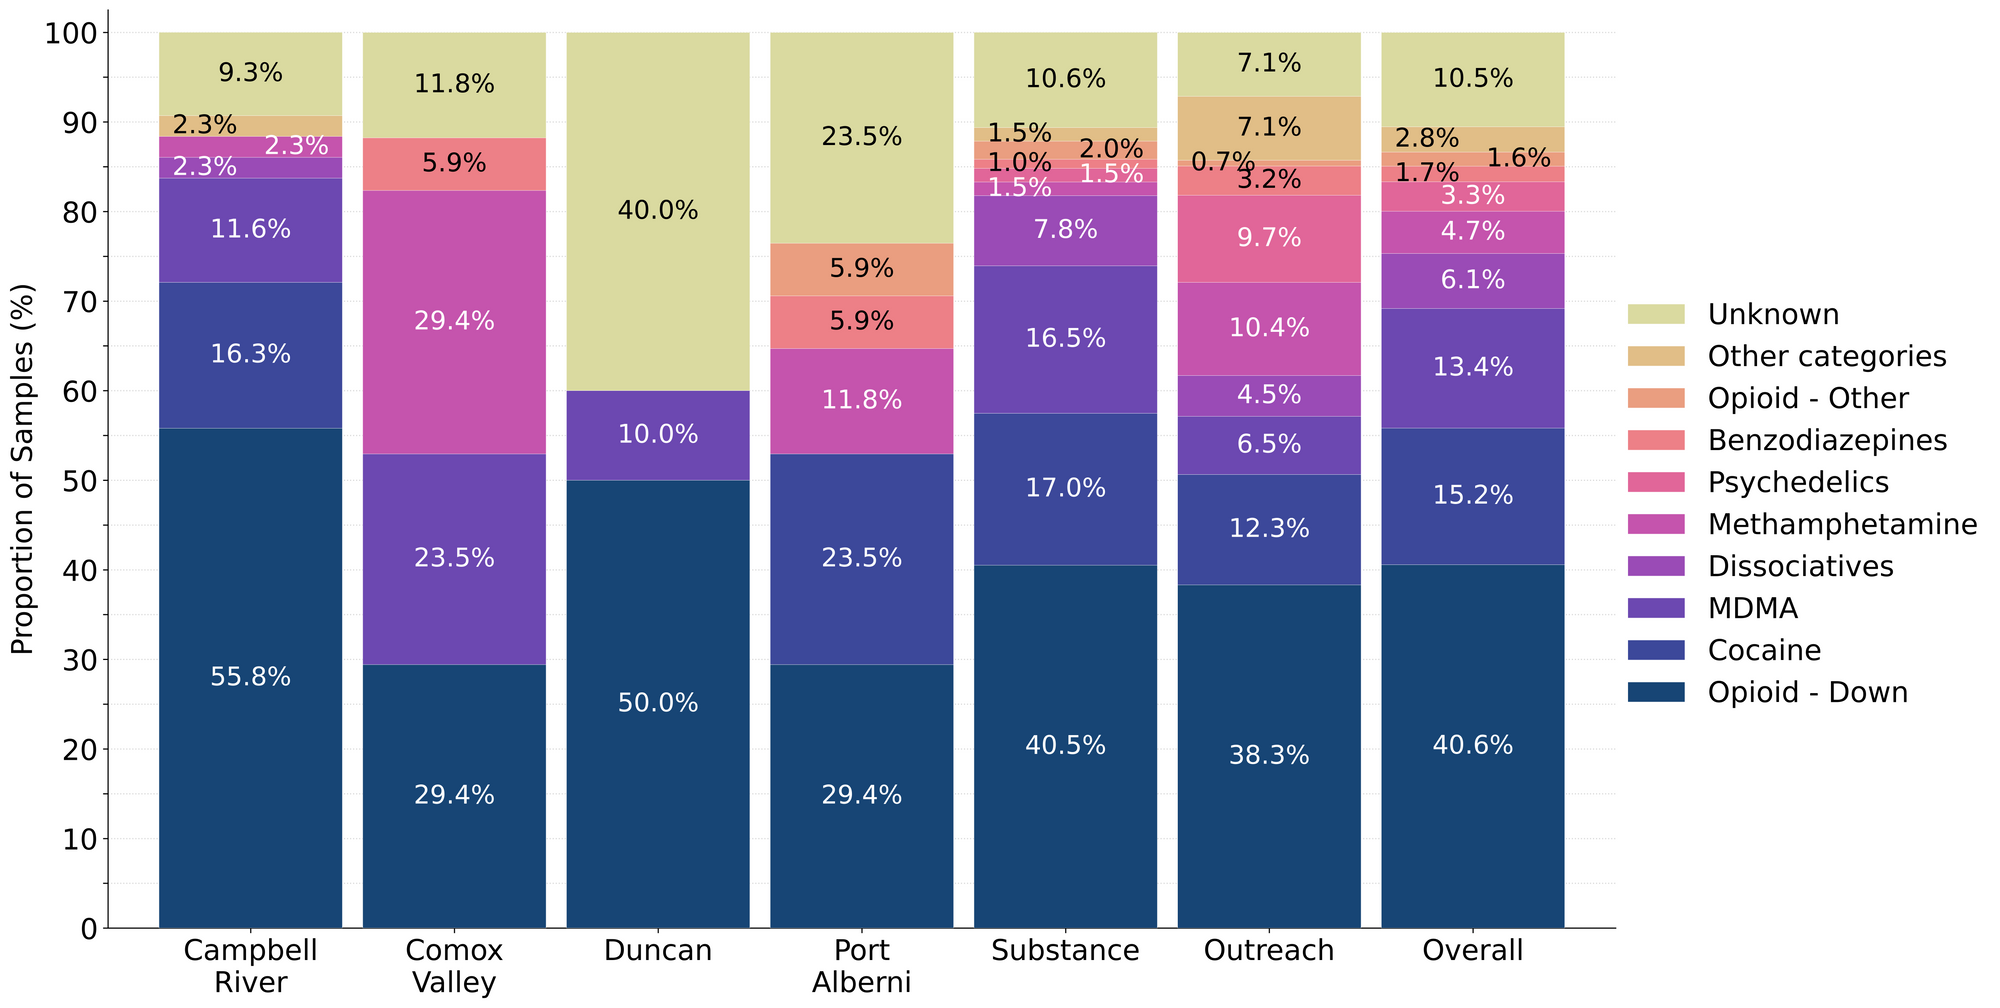 Figure 1. Prevalence of drug classes checked during October split by sample collection/method. Bars are stacked by the percentage of samples in each drug class, with the individual sample counts overlaid.